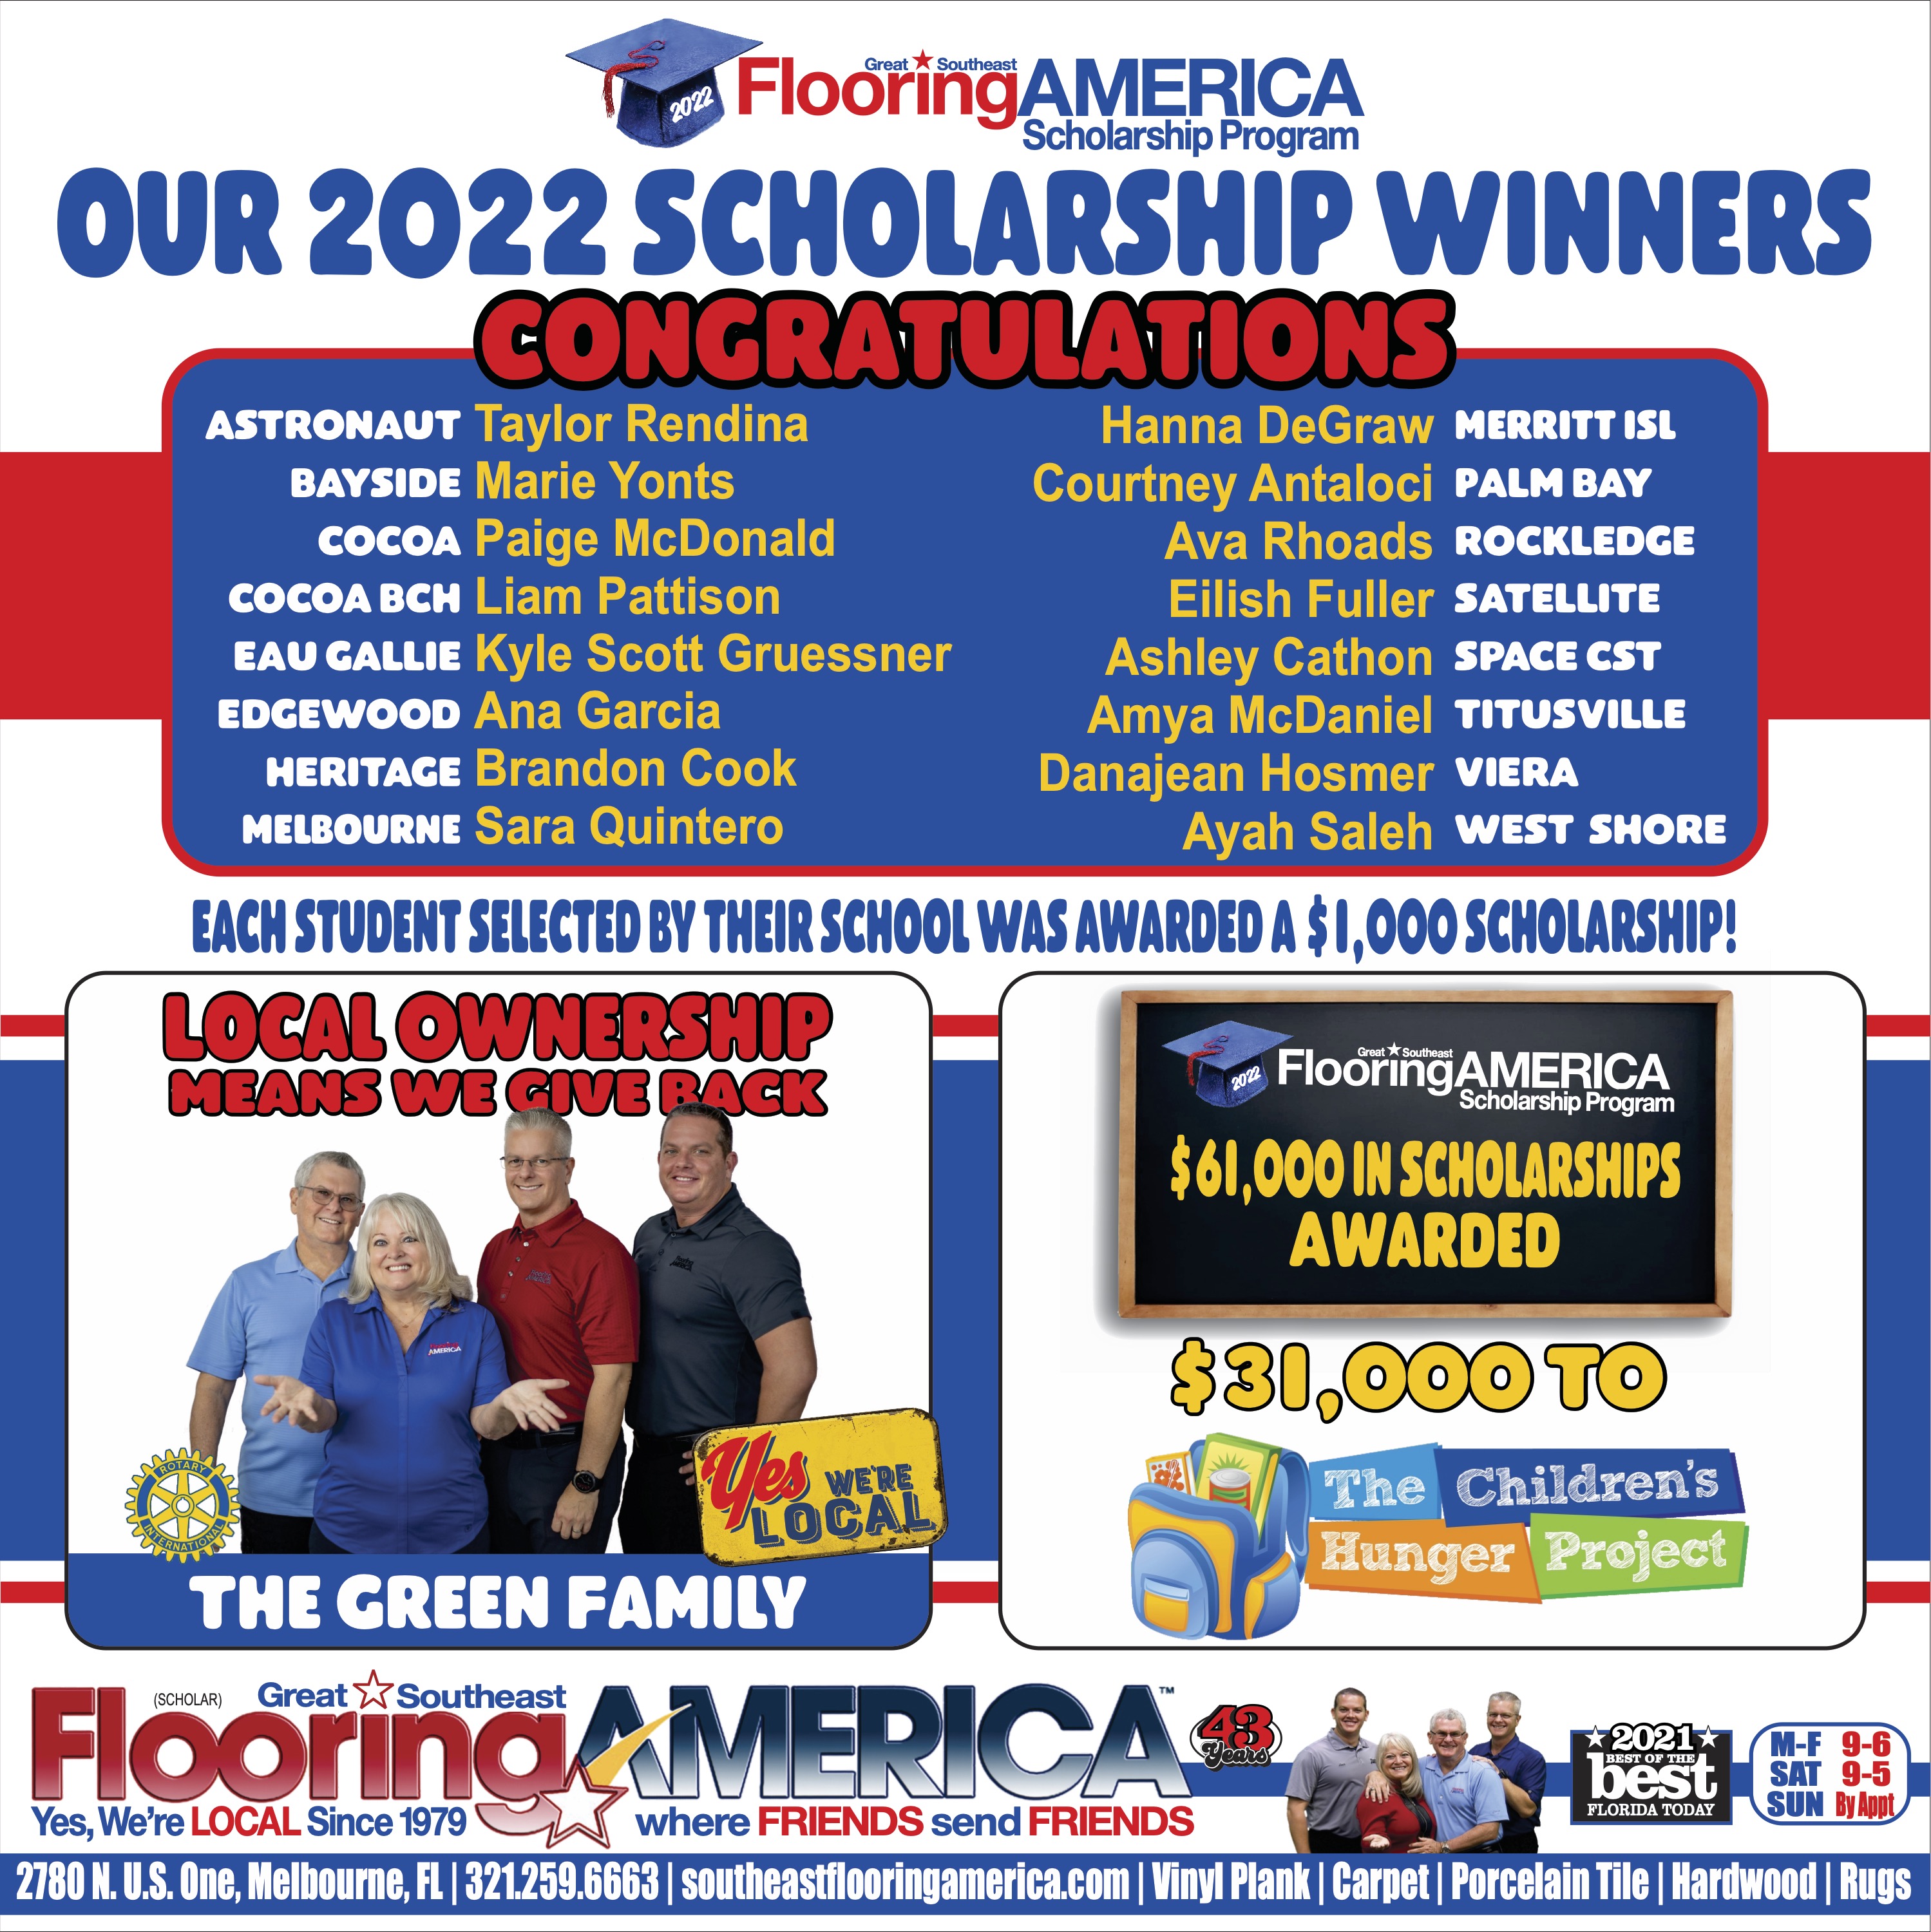 Our 2022 Scholarship Winners